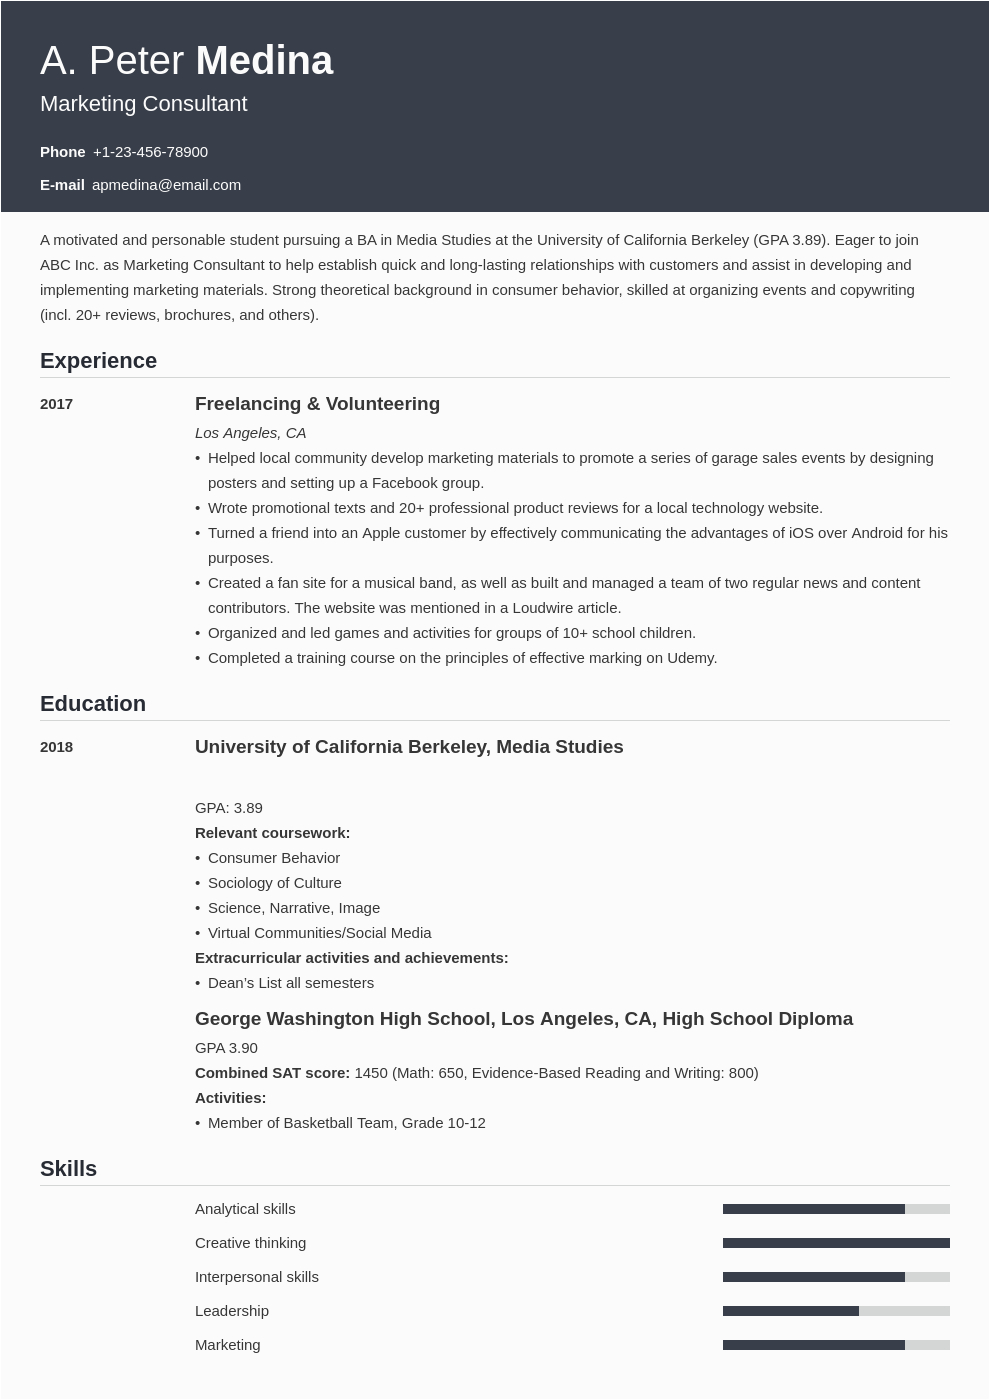 Best Resume Template for No Work Experience How to Write A Resume with No Experience & Get the First Job